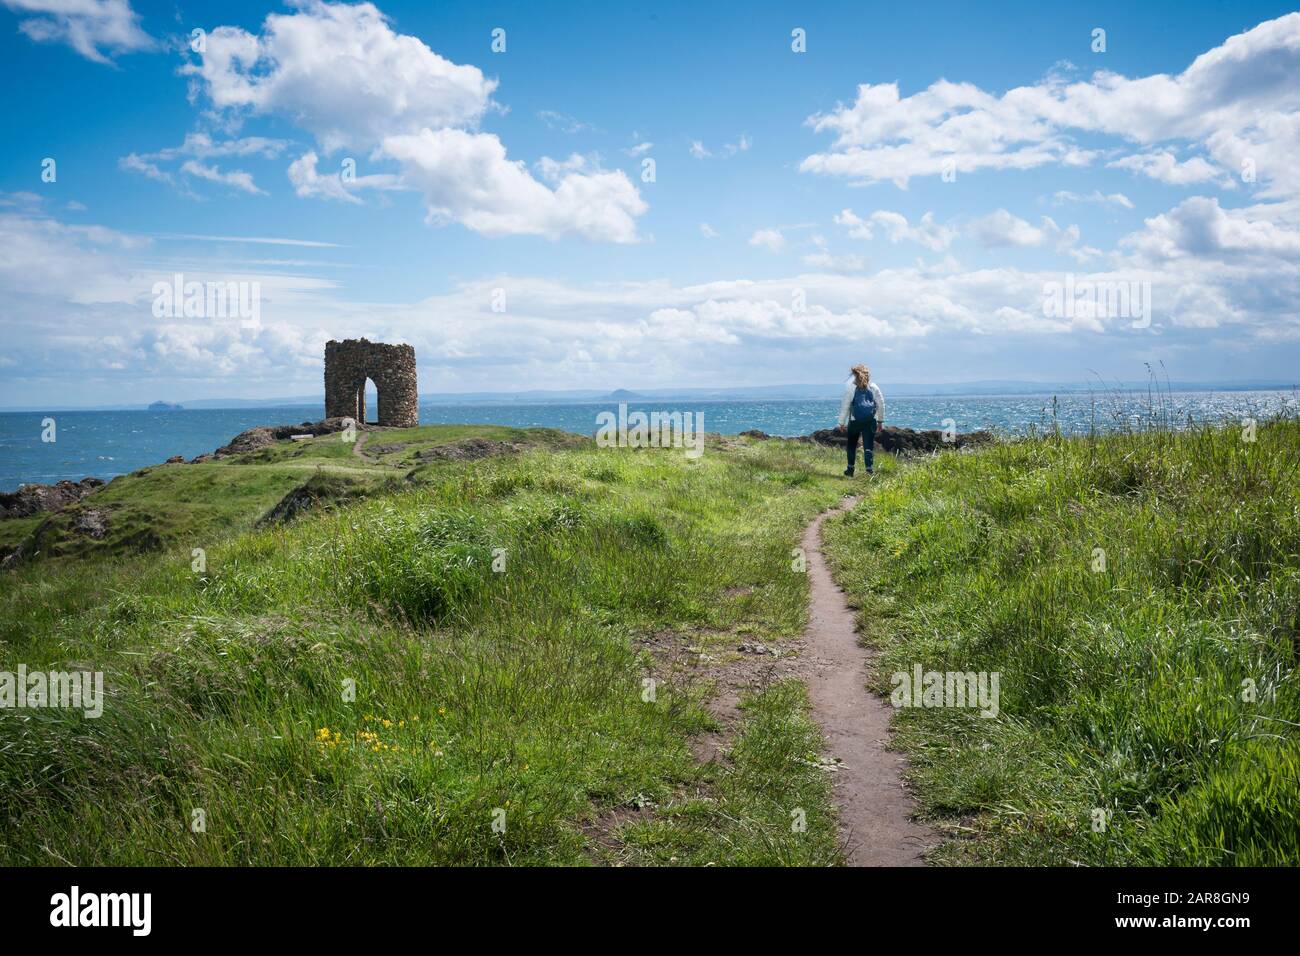 Tourist on the hiking path leading to the unusual stone Lady Tower built in the 1760's perched on the North Sea, East Neuk of Fife, Elie, Scotland, UK Stock Photo